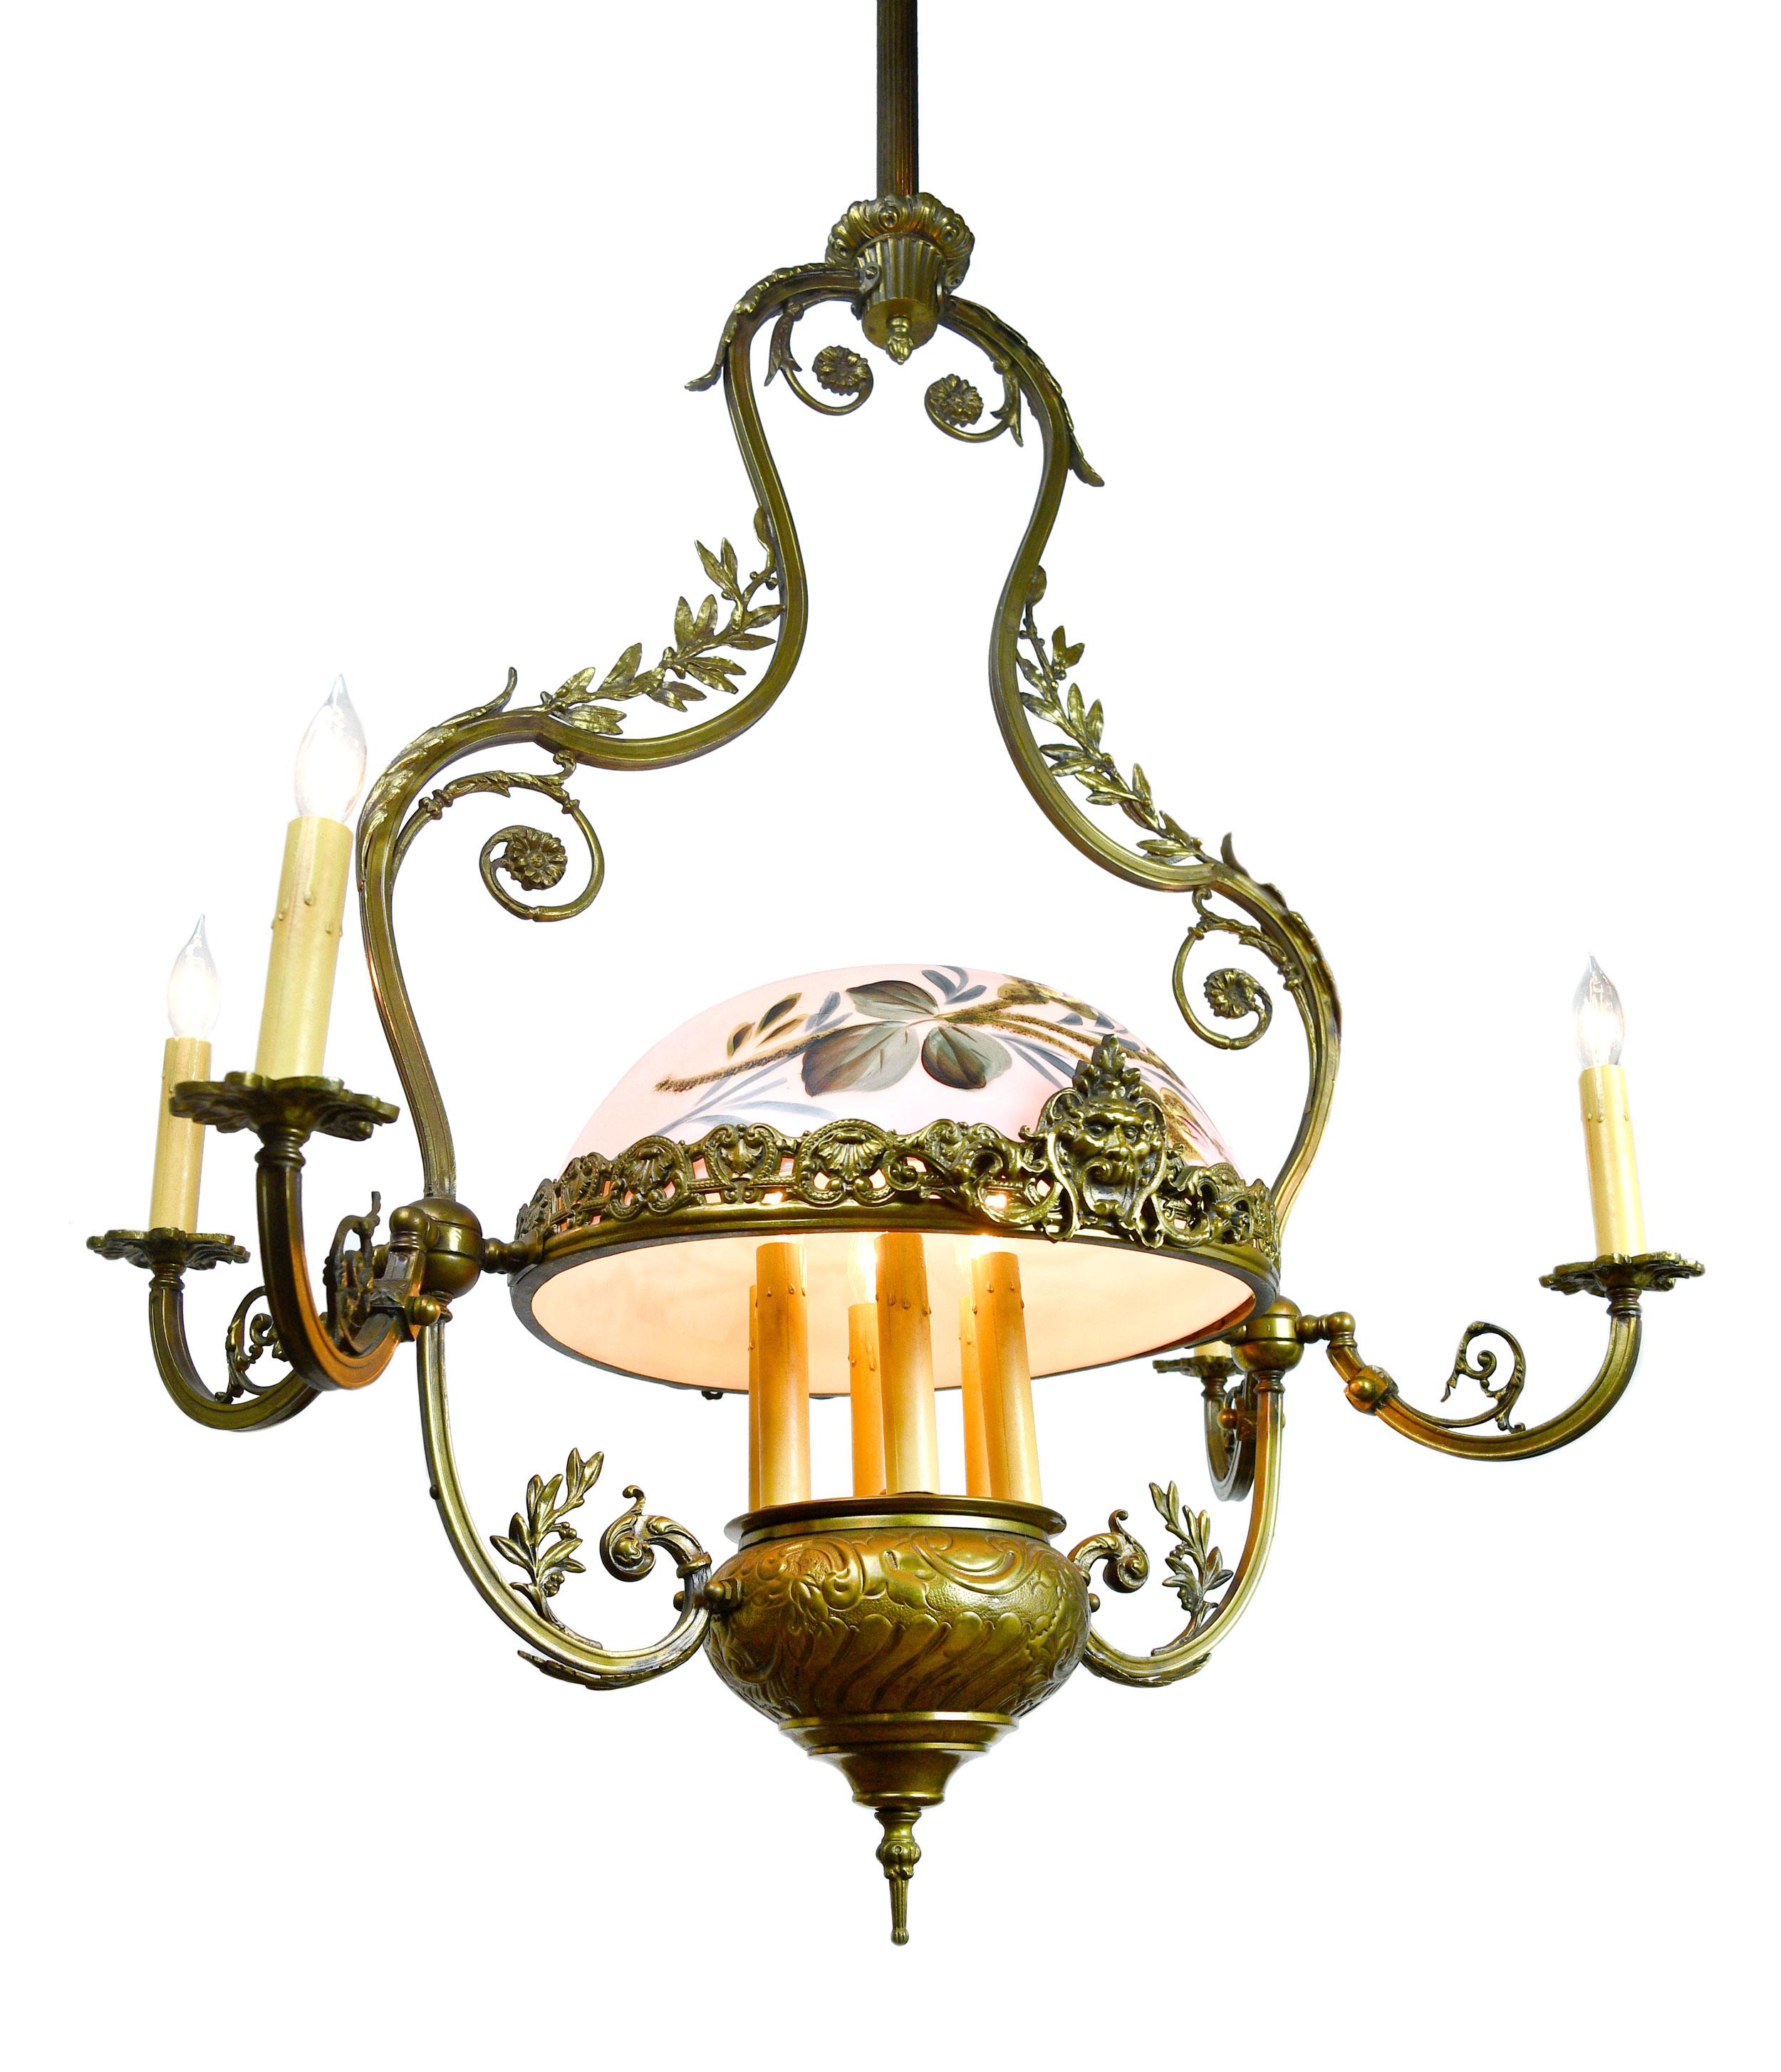 This finely crafted chandelier features intricate detailing within the handsome brass and lovely floral designs throughout both the structure and the shade. The craftsmanship of this extra tall chandelier needs to be seen to believe!